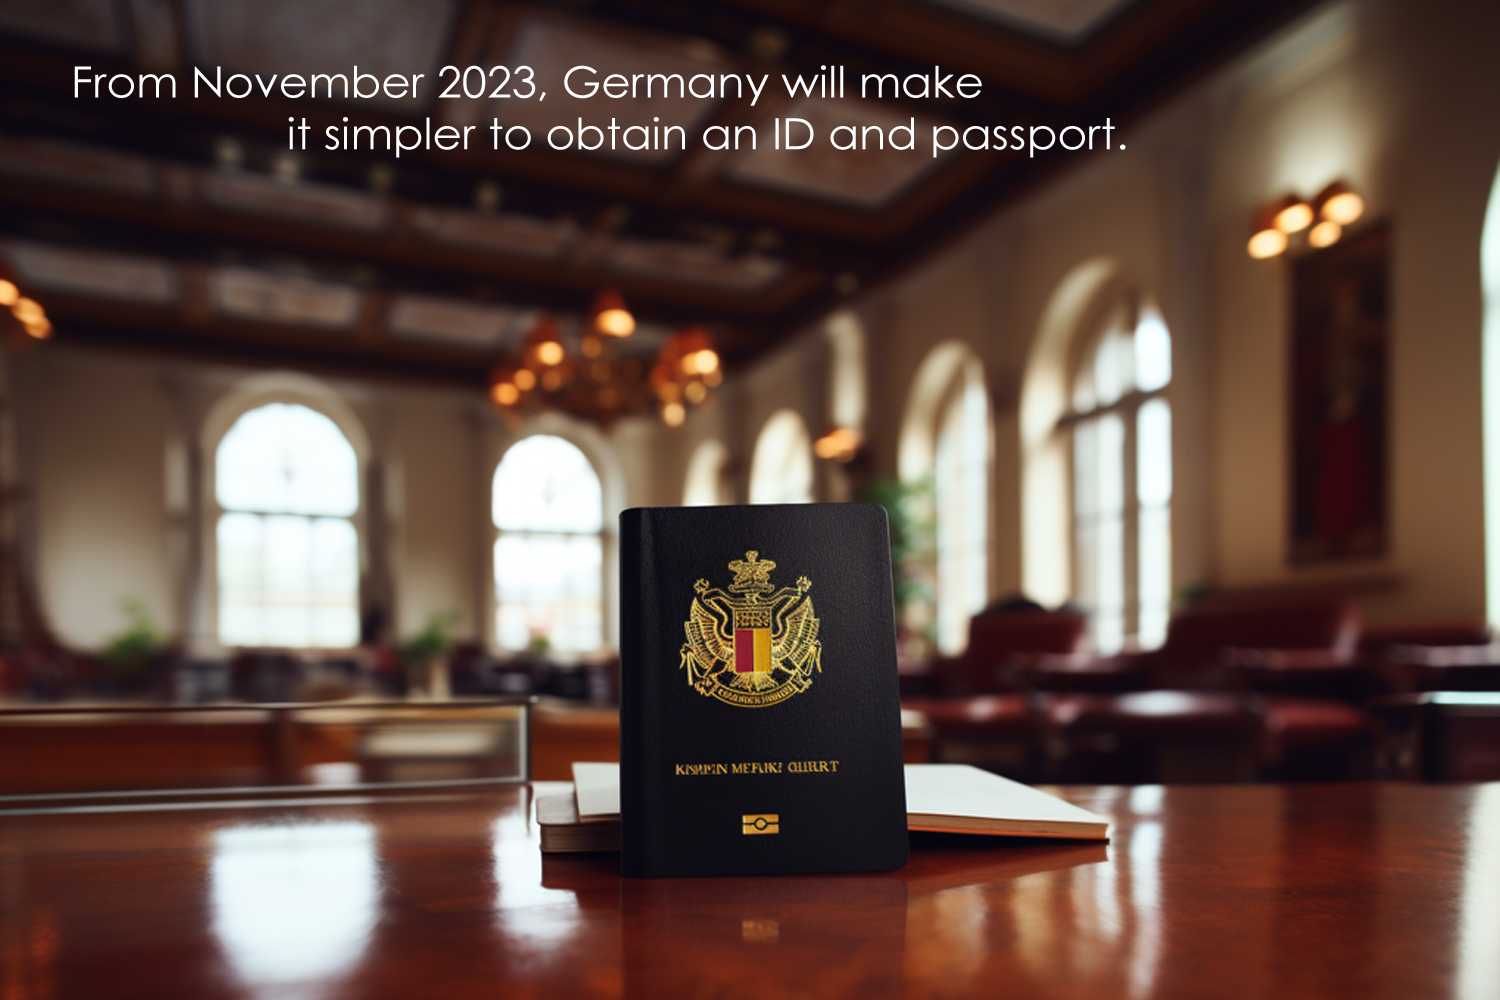 From November 2023, Germany will make it simpler to obtain an ID and passport.